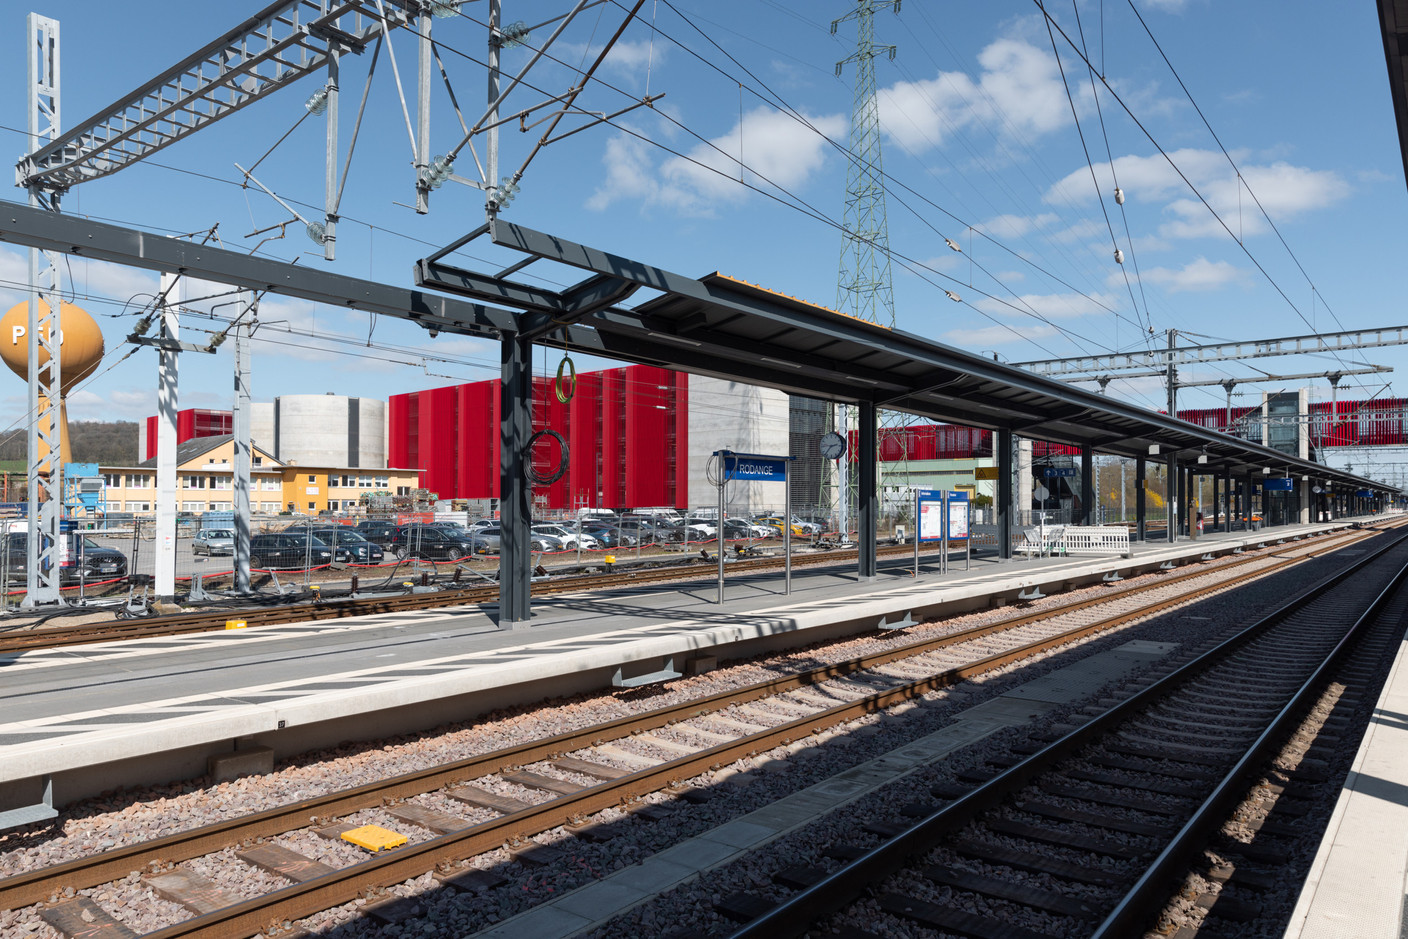 Work on the station will continue for several more months. Photo: Romain Gamba/Maison Moderne